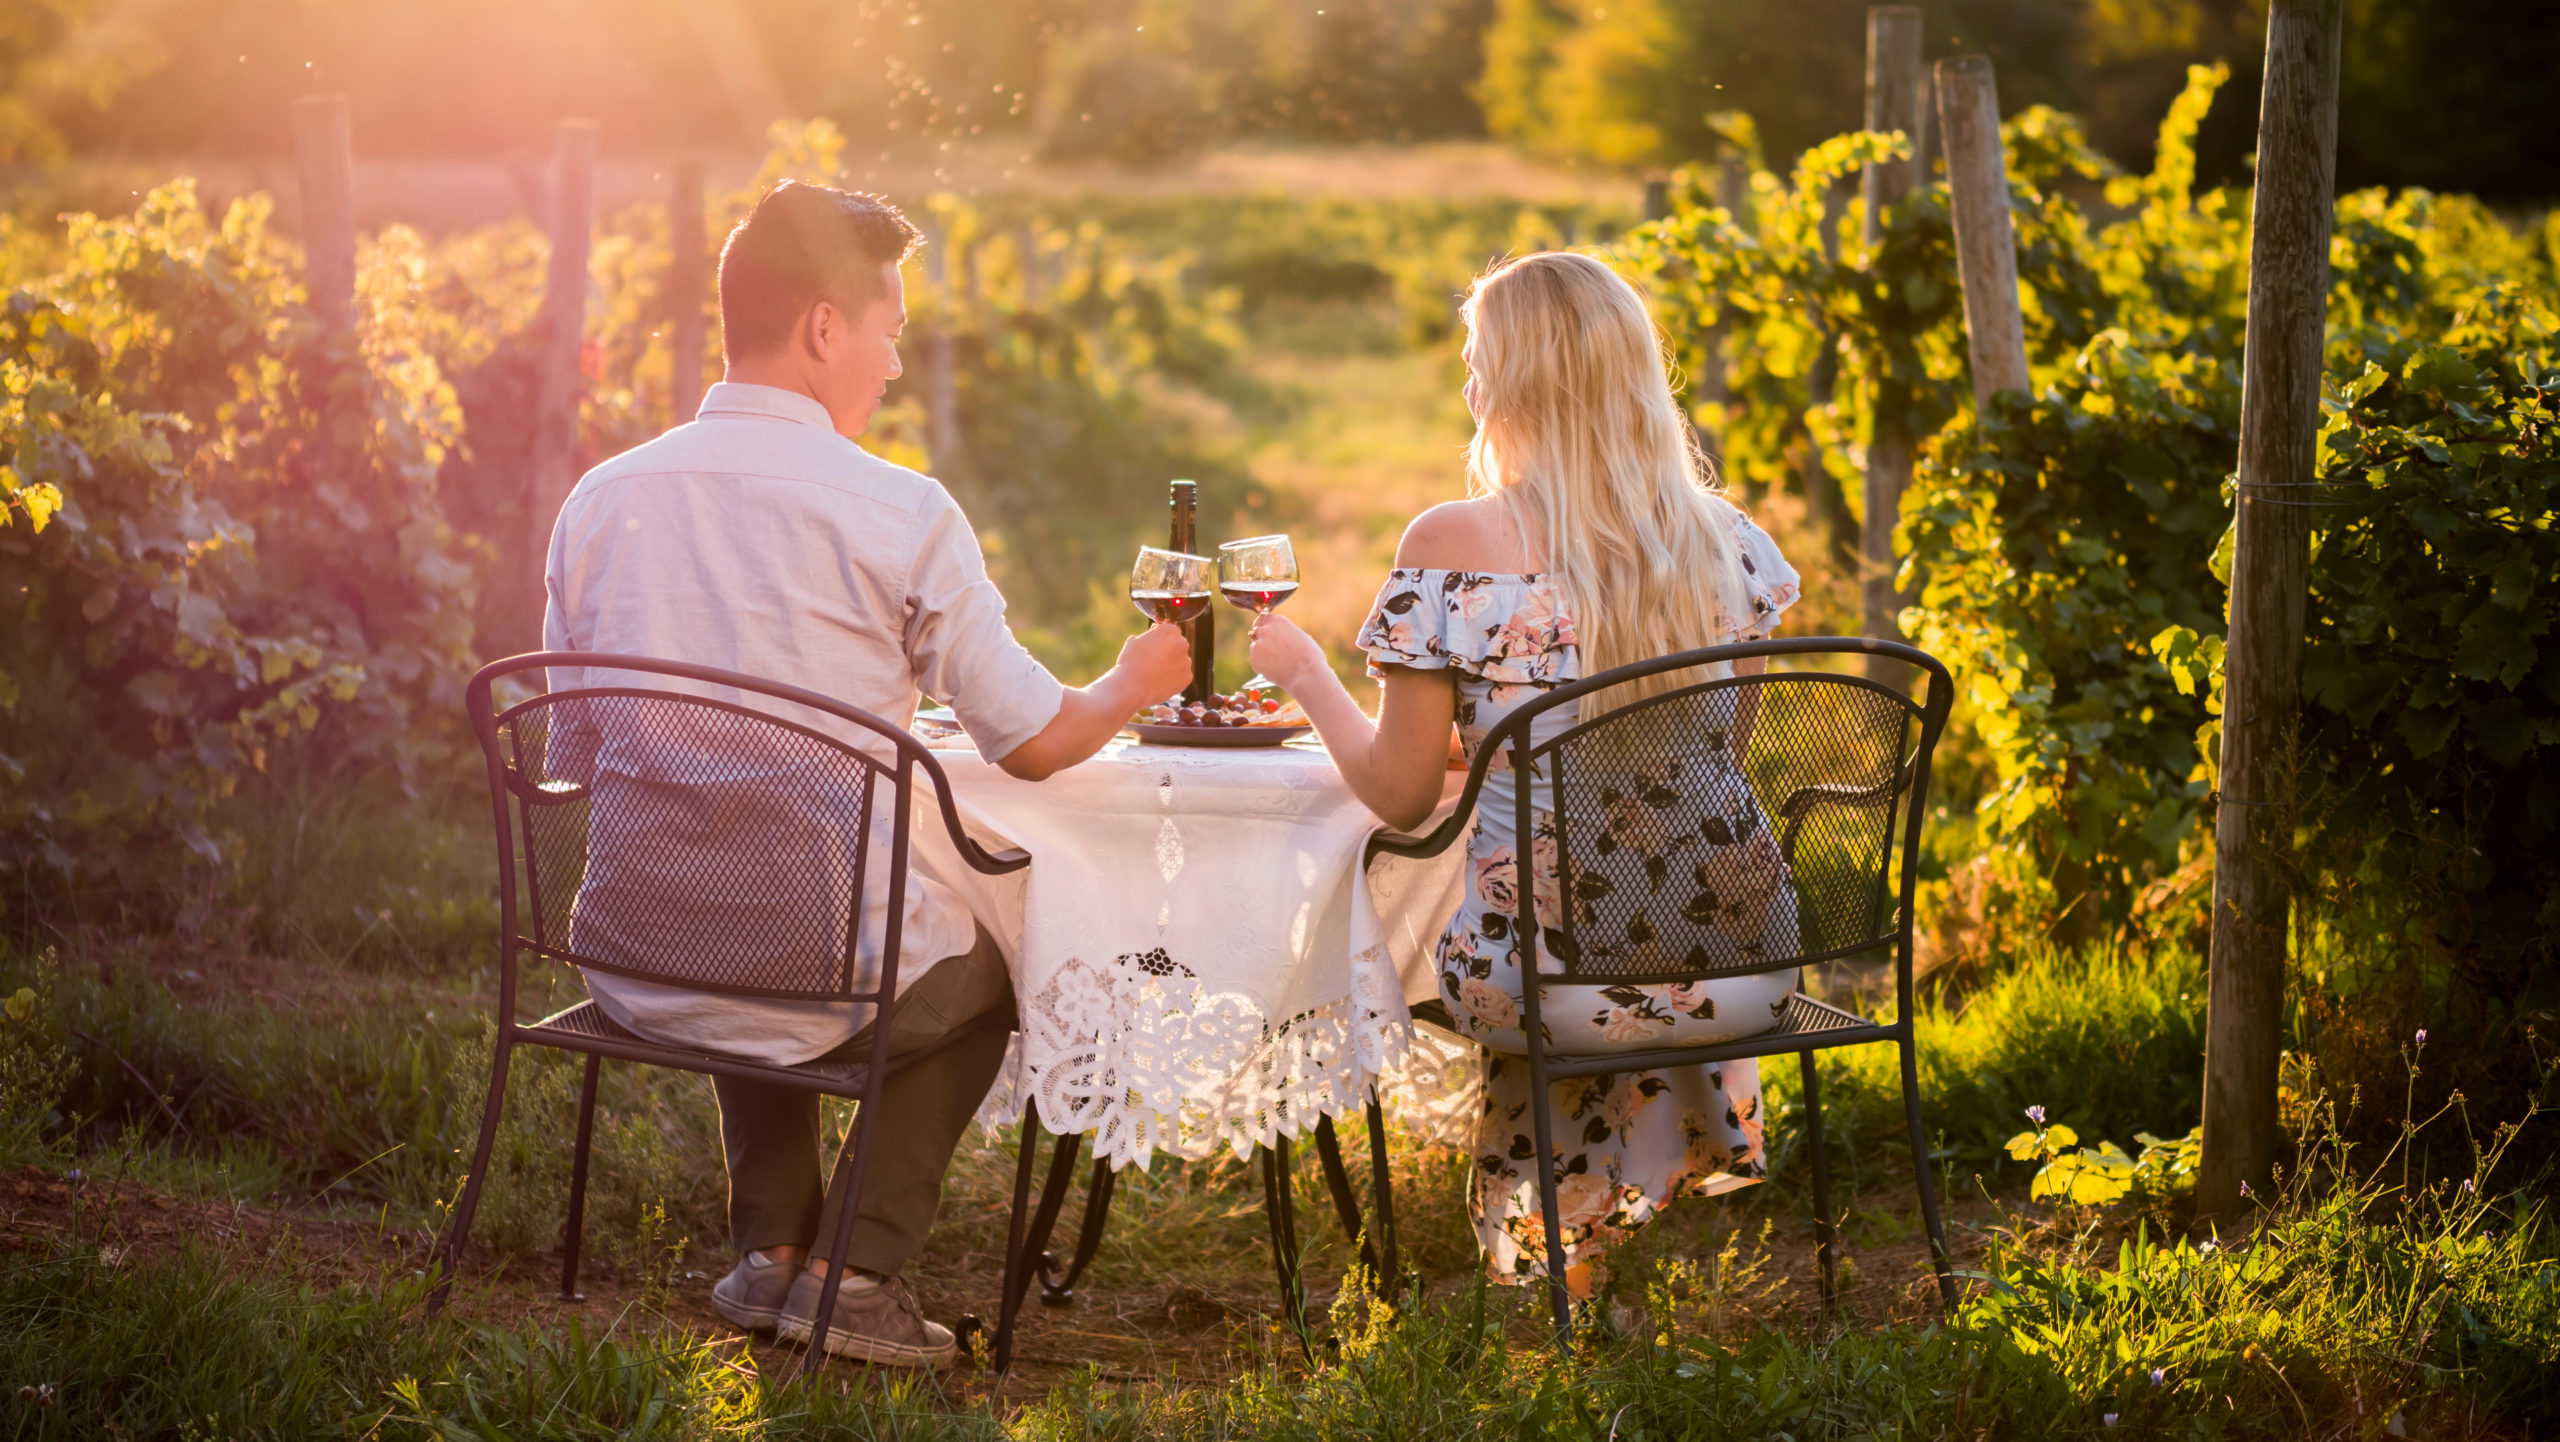 Romantic Dinner With Wine Tasting In A Place At Sunset